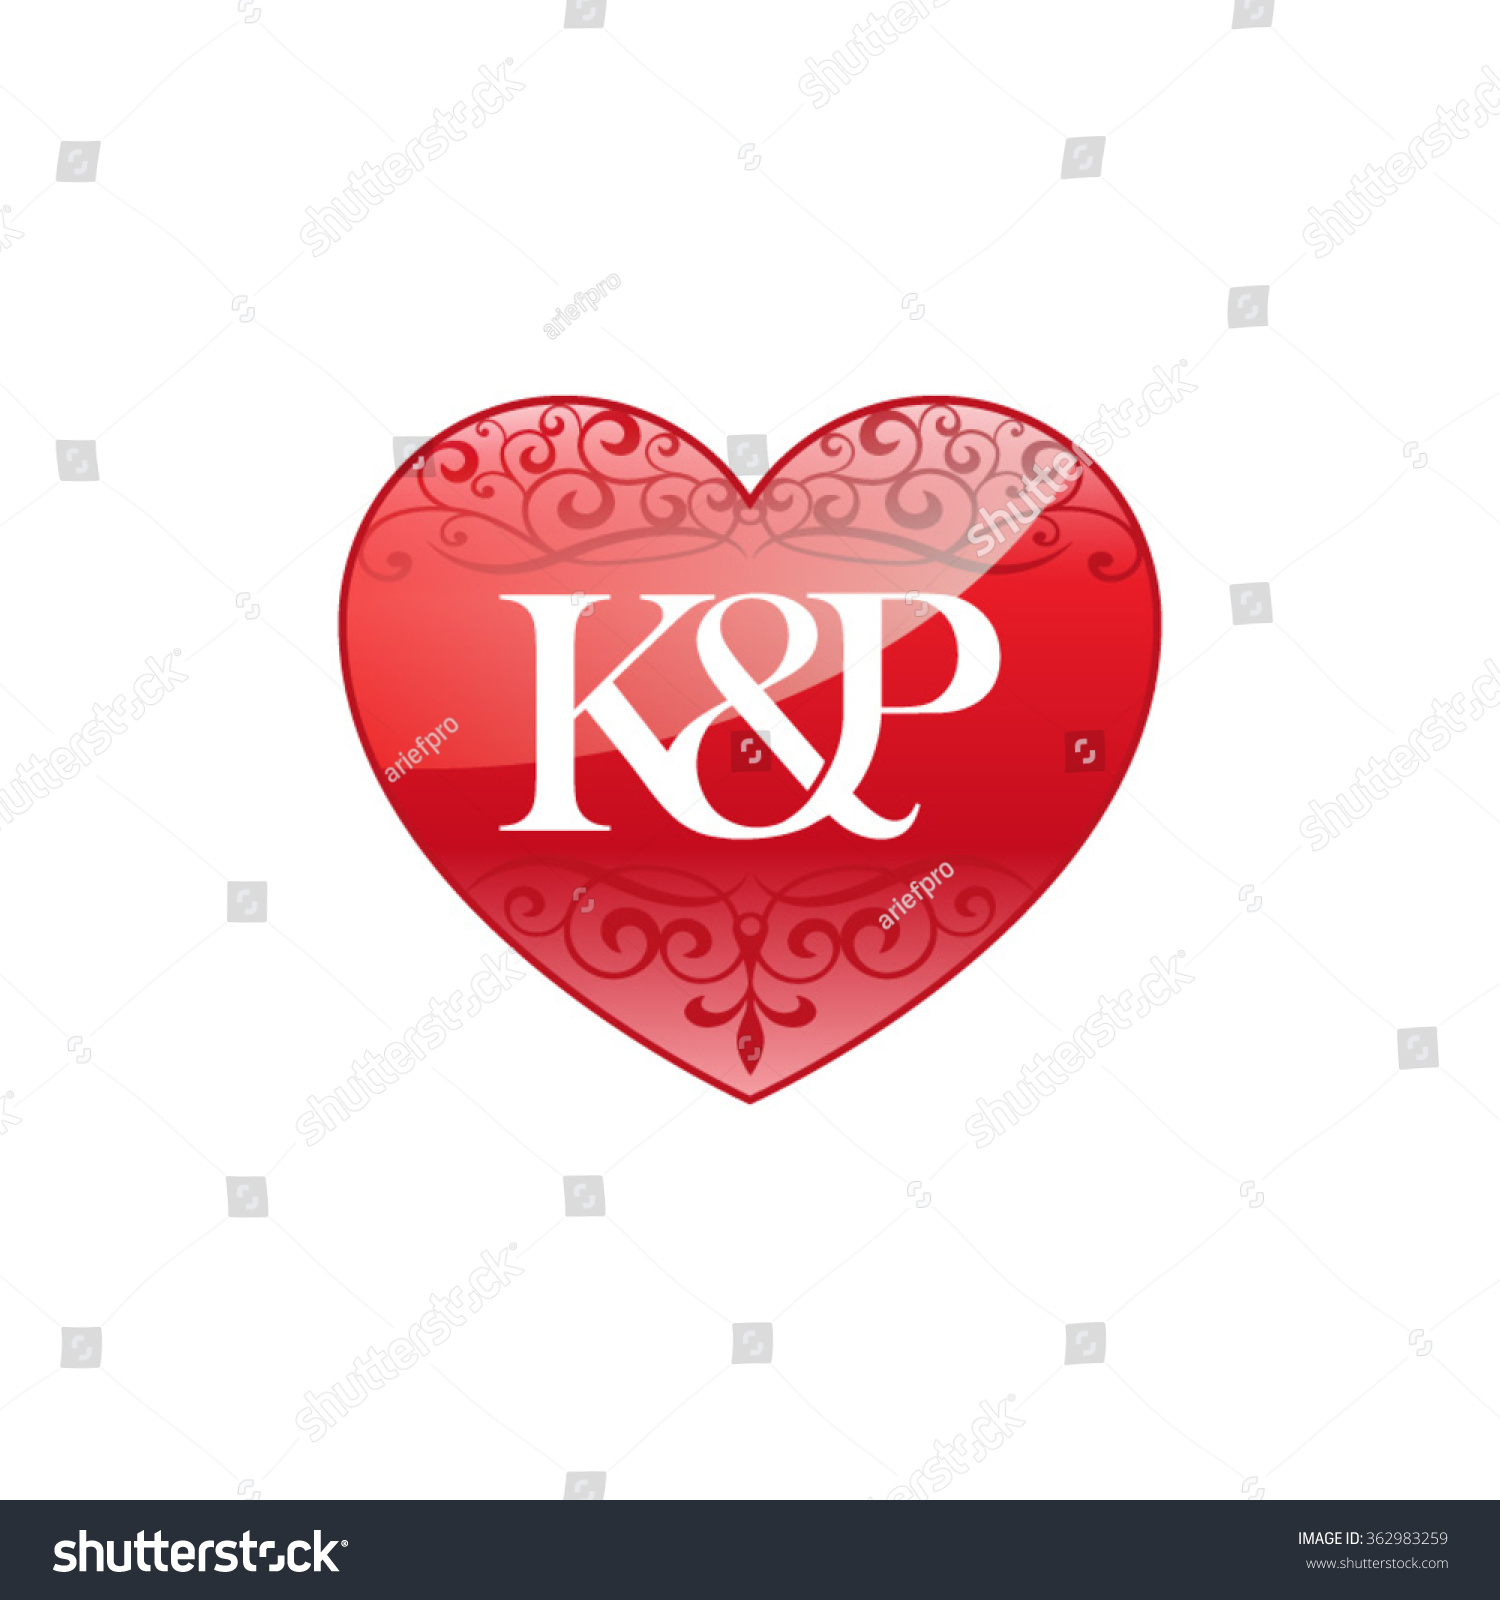 Picture Of Love Heart And Romantic Wallpapers Heart Kp Love Images